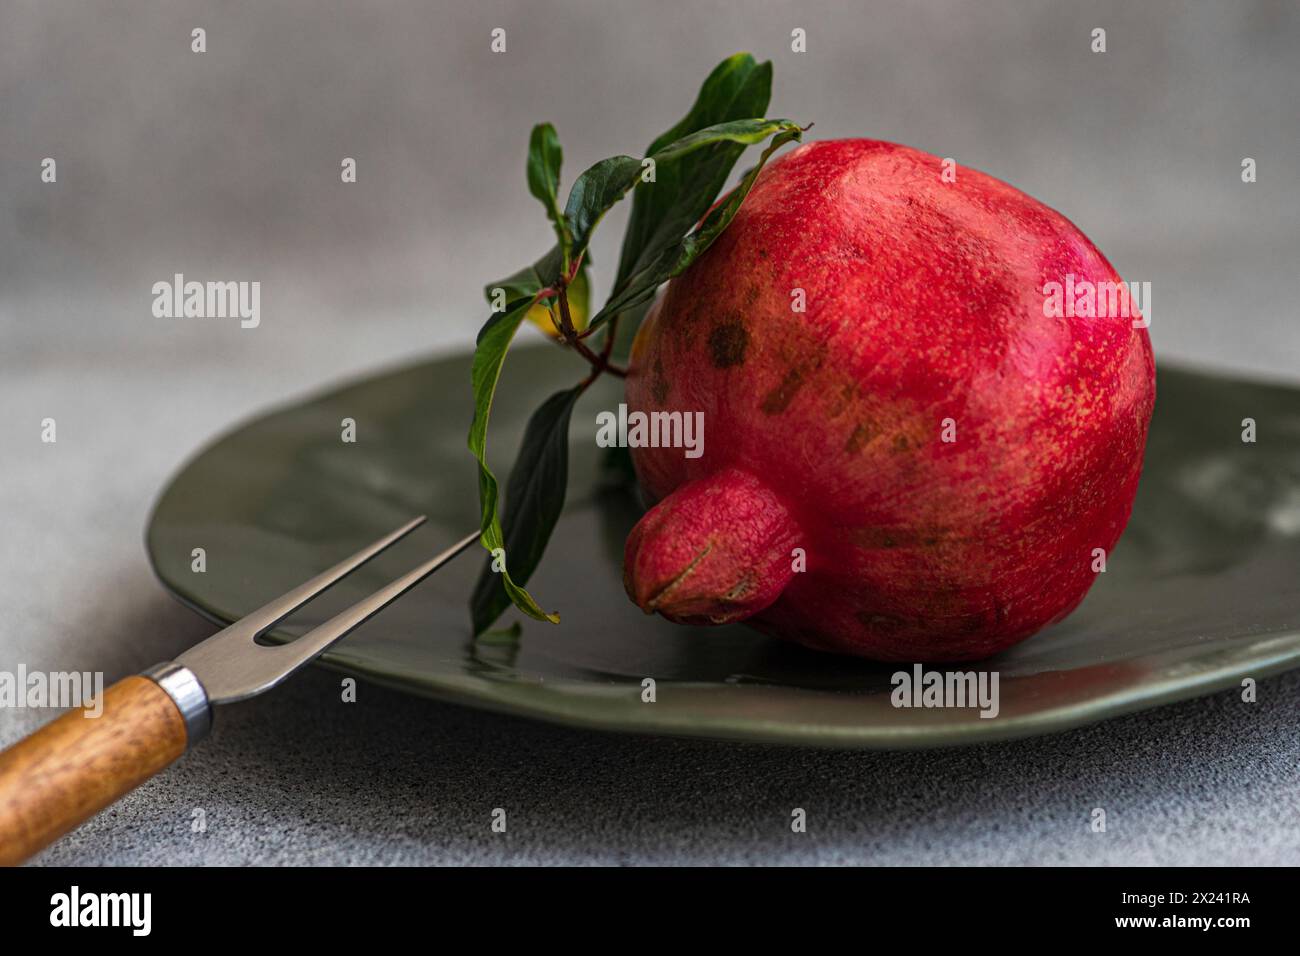 Ripe pomegranate with leaves on a plate Stock Photo